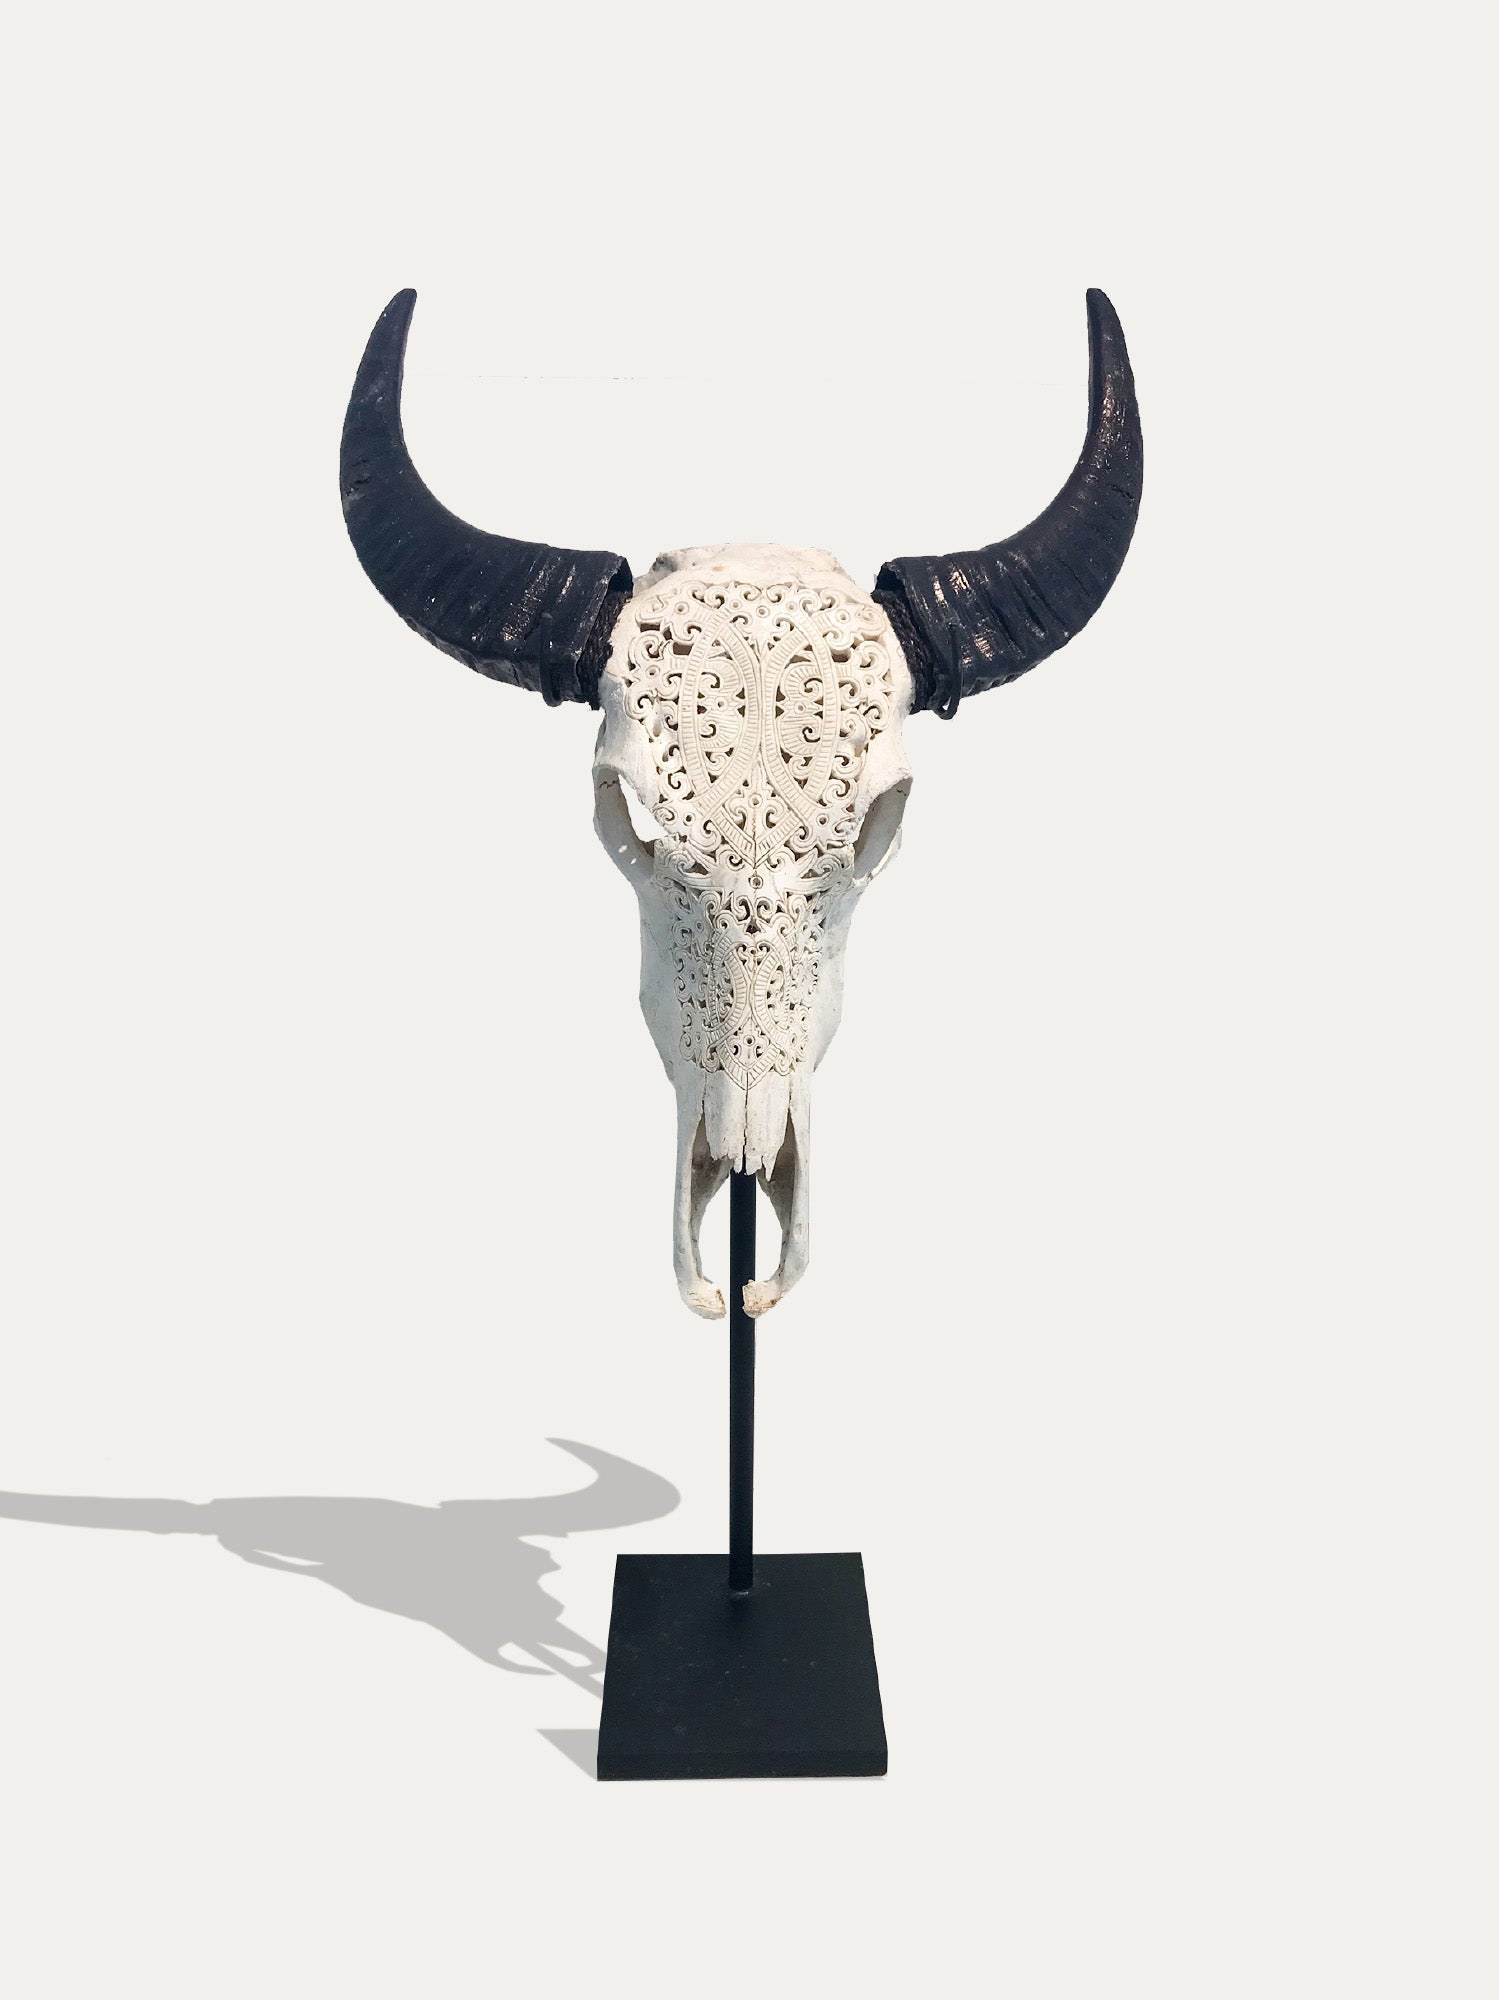 Hand Carved Buffalo Scull From Bali - Asian Art from Kirschon